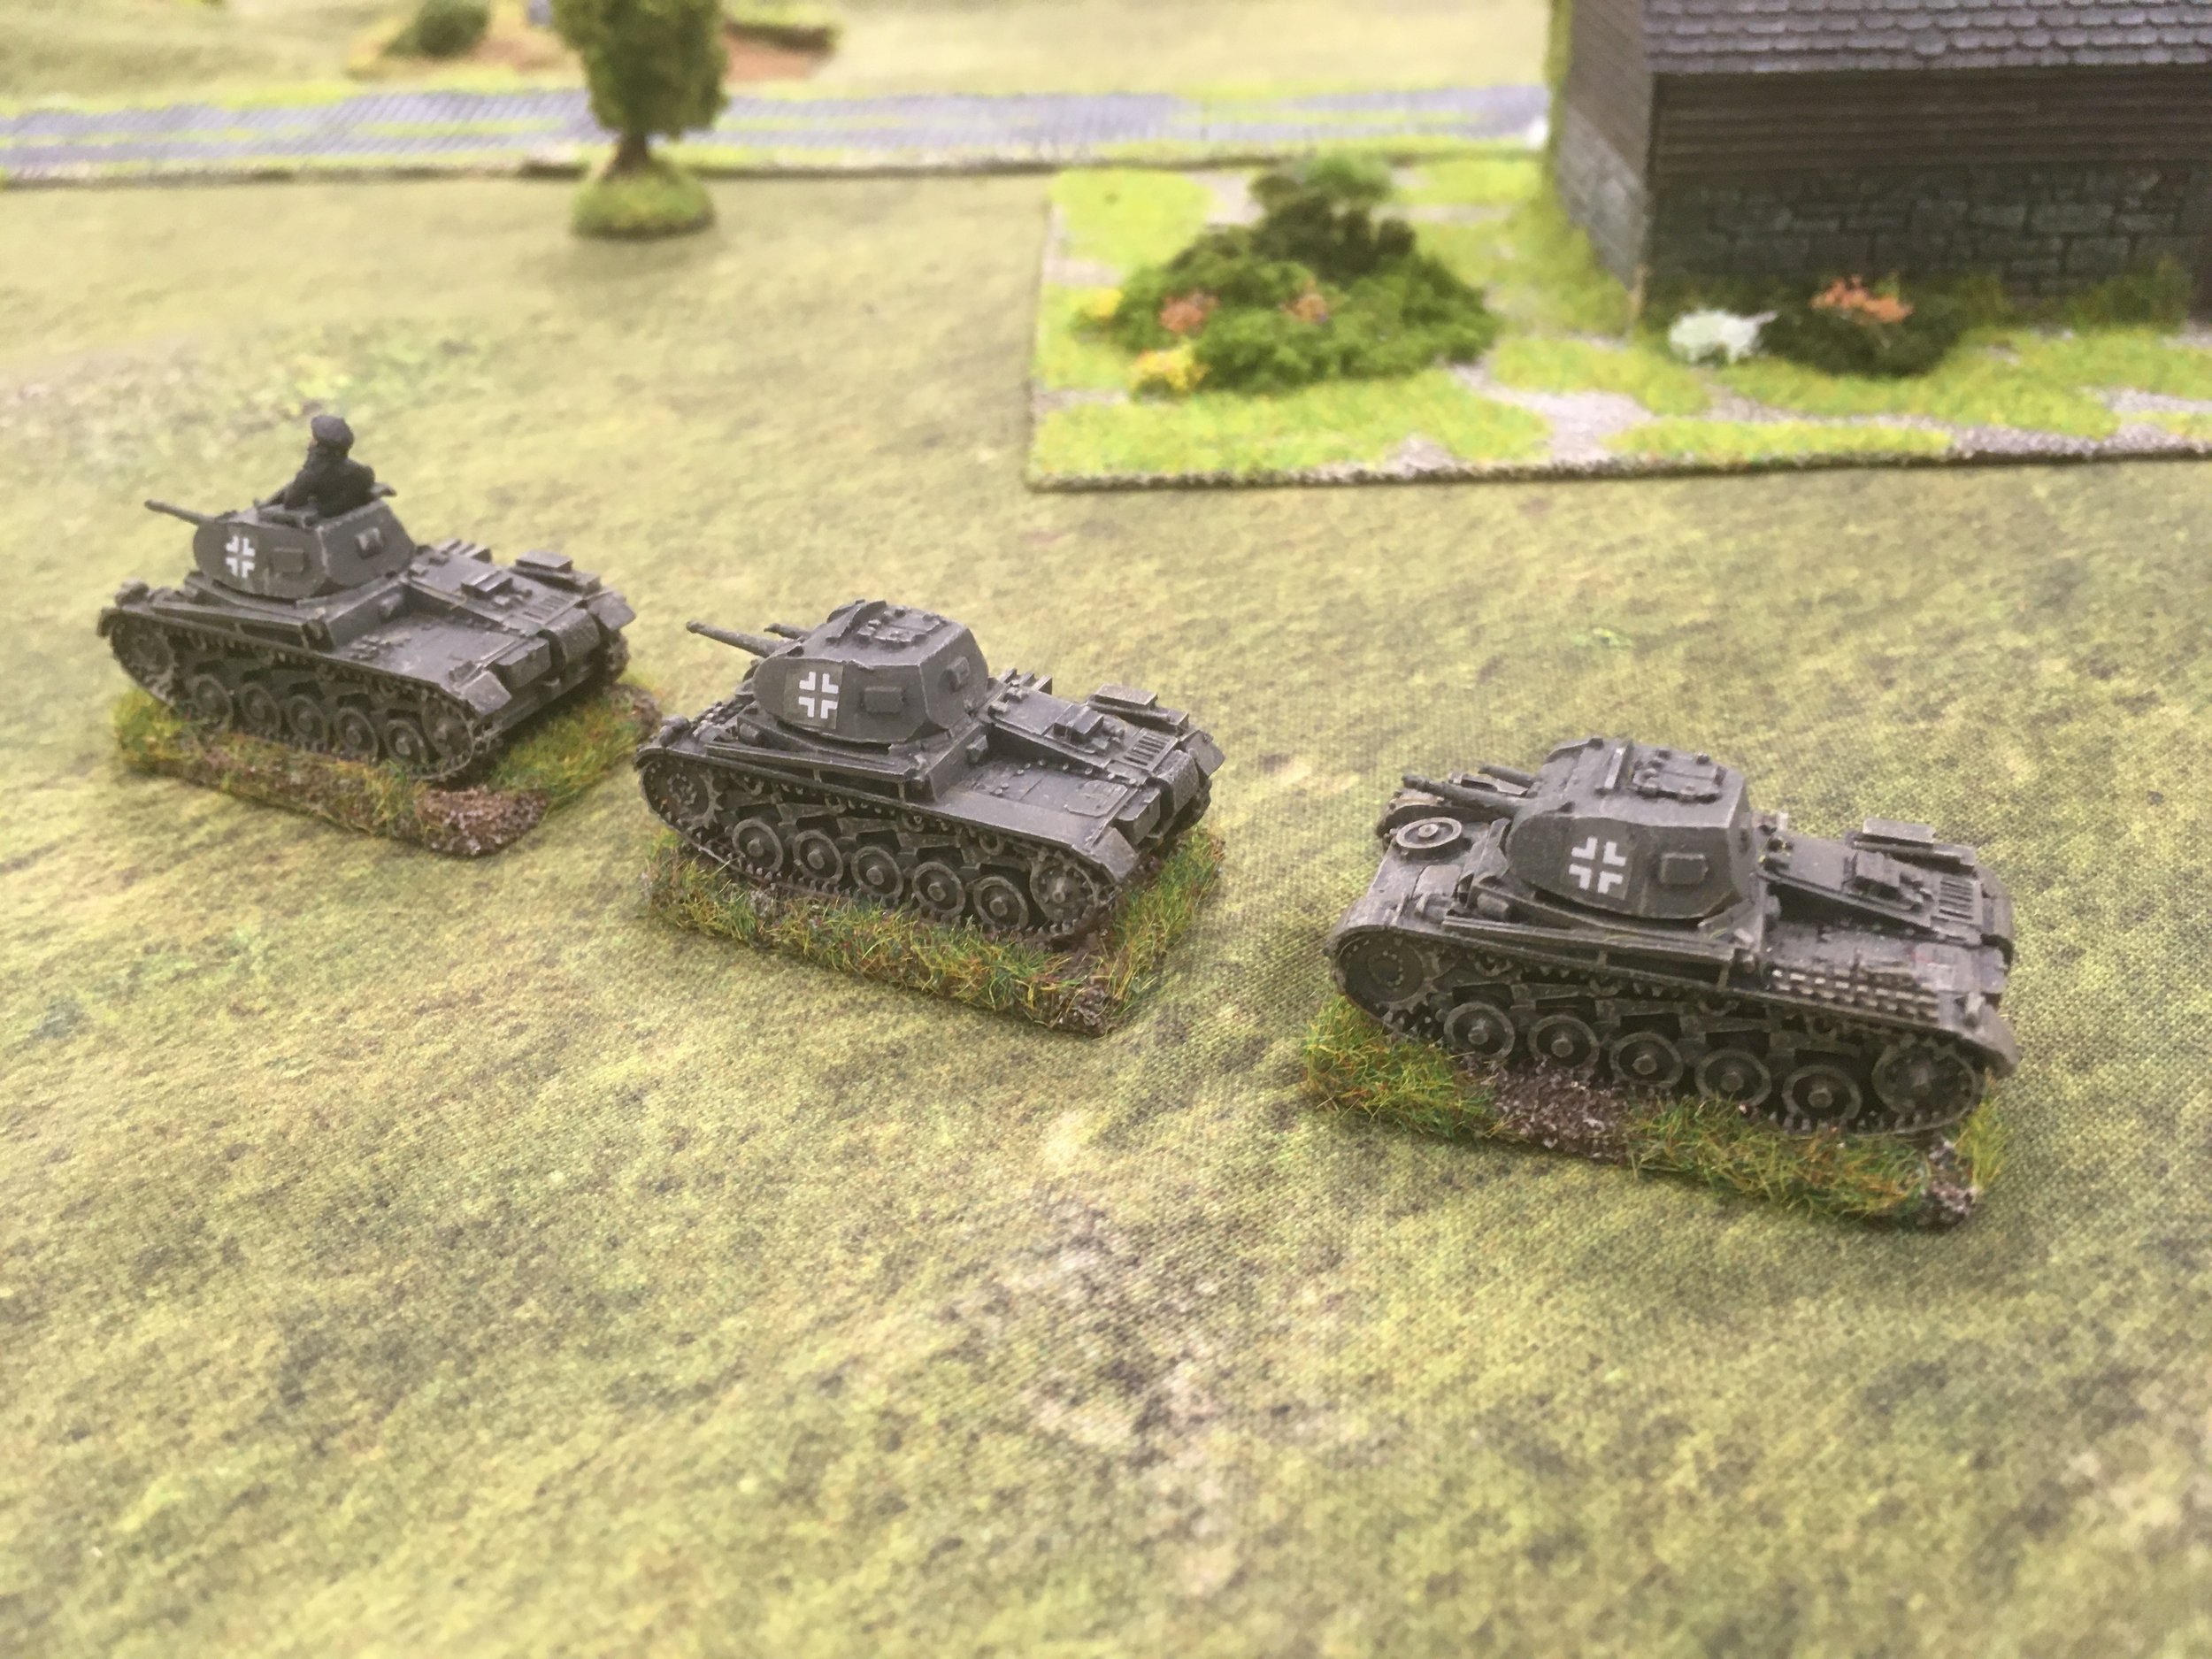 Whilst the Panzer II's head towards the village in an effort to bring their cannon to bear on the defenders.